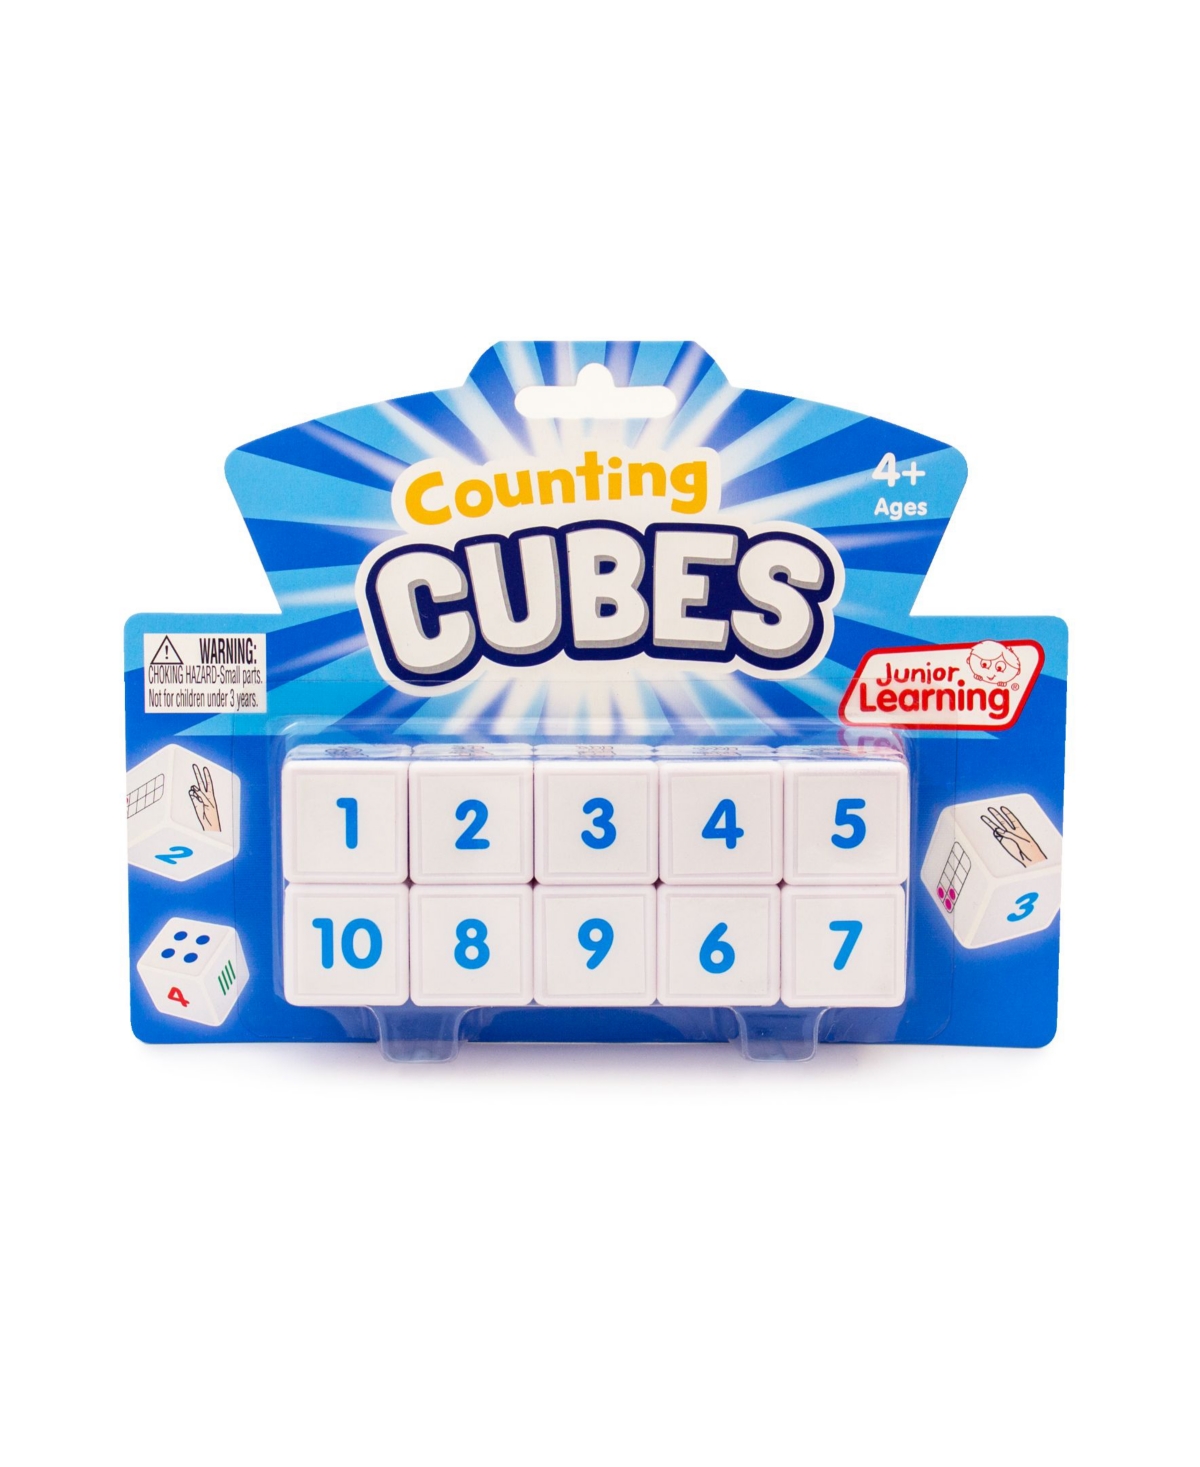 Junior Learning Counting Cubes Educational Learning Set, 10 Cubes In Multi